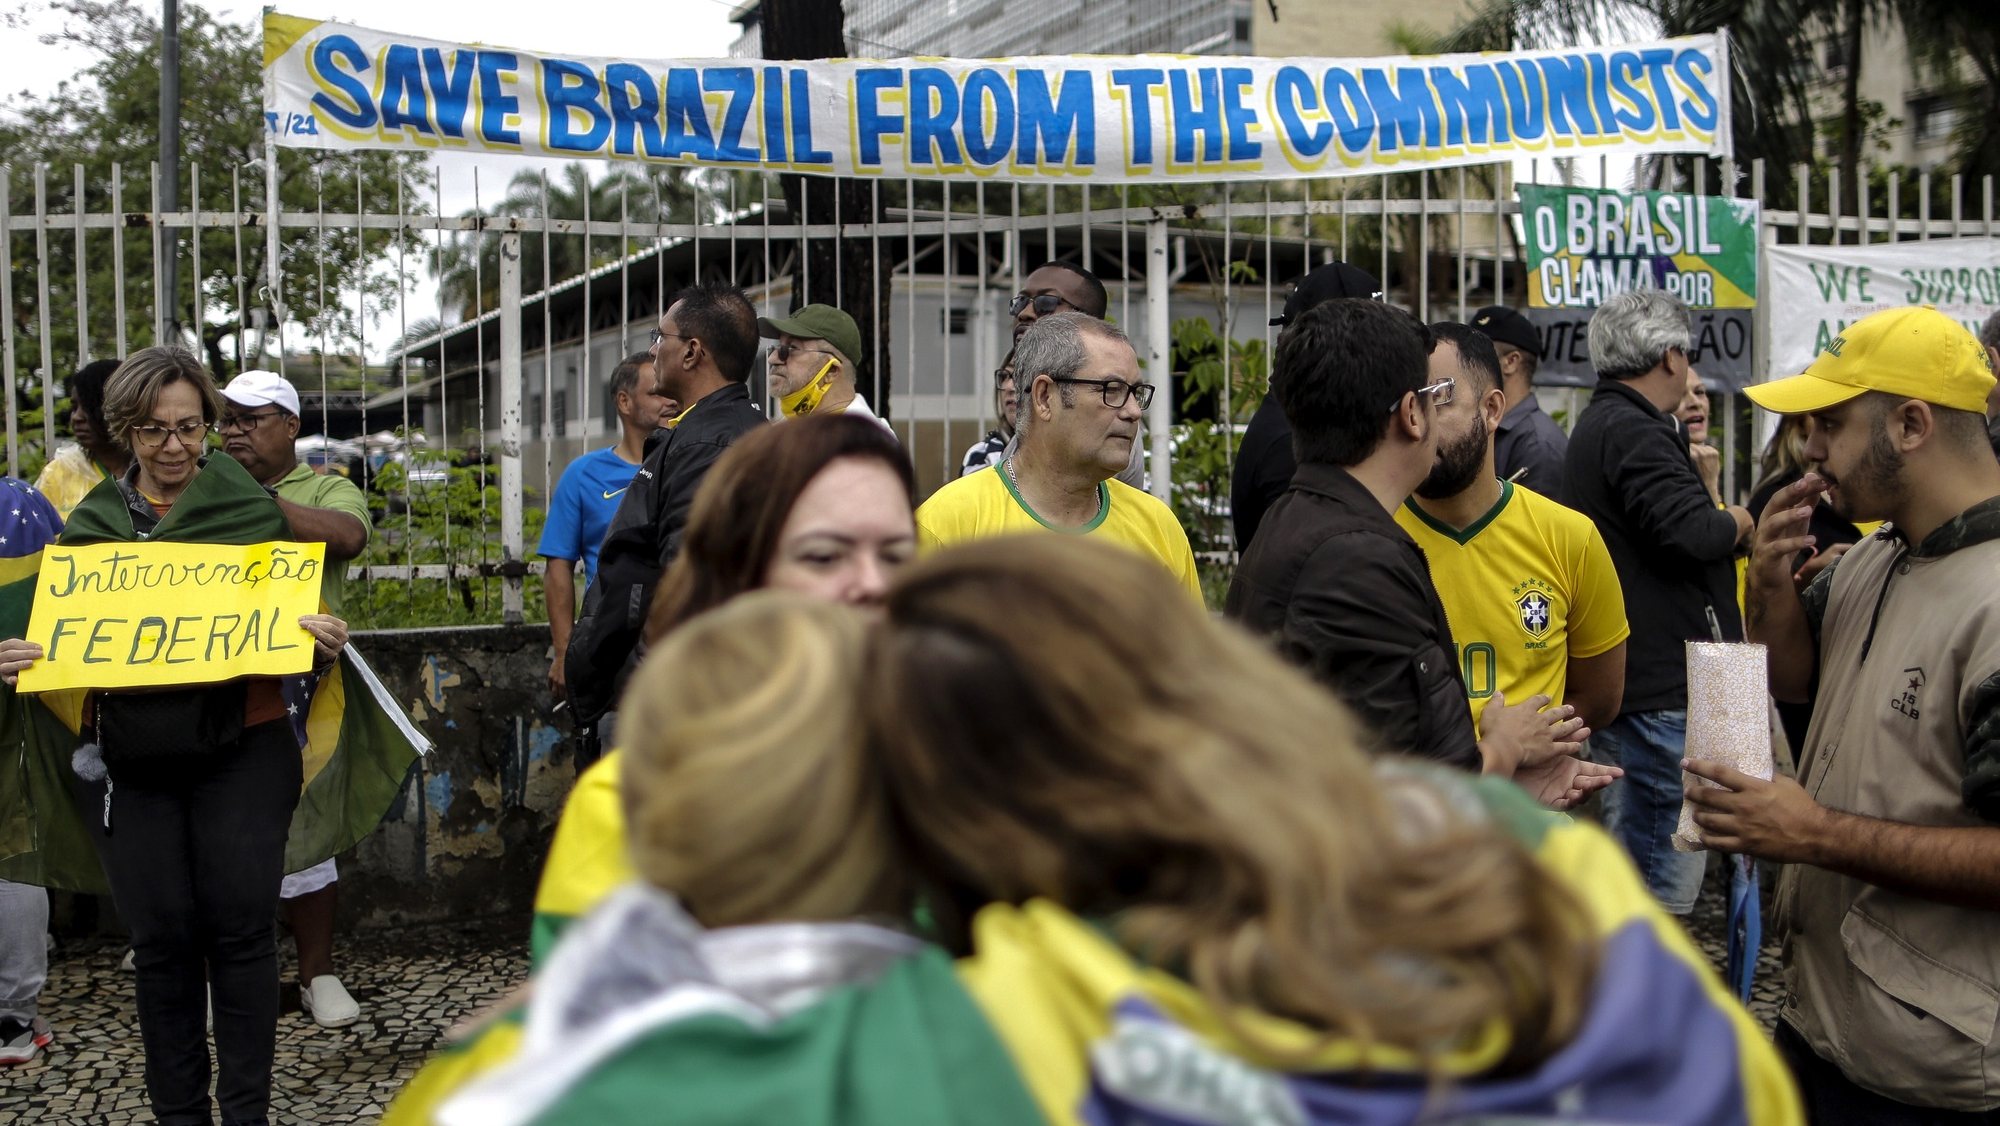 epa10281839 Supporters of outgoing Brazilian President Jair Bolsonaro gather near a banner reading &#039;Save Brazil from the communists&#039; during a protest against the election results, outside the Eastern Military Command in Rio de Janeiro, Brazil, 02 November 2022. Thousands of people have gathered in front of the gates of barracks in Sao Paulo, Brasilia and Rio de Janeiro to demand a &#039;military intervention&#039; against the electoral victory of progressive leader Luiz Inacio Lula da Silva. The rallies were organized through social networks by far-right groups that support Bolsonaro and do not recognize Lula&#039;s democratic election.  EPA/ANTONIO LACERDA